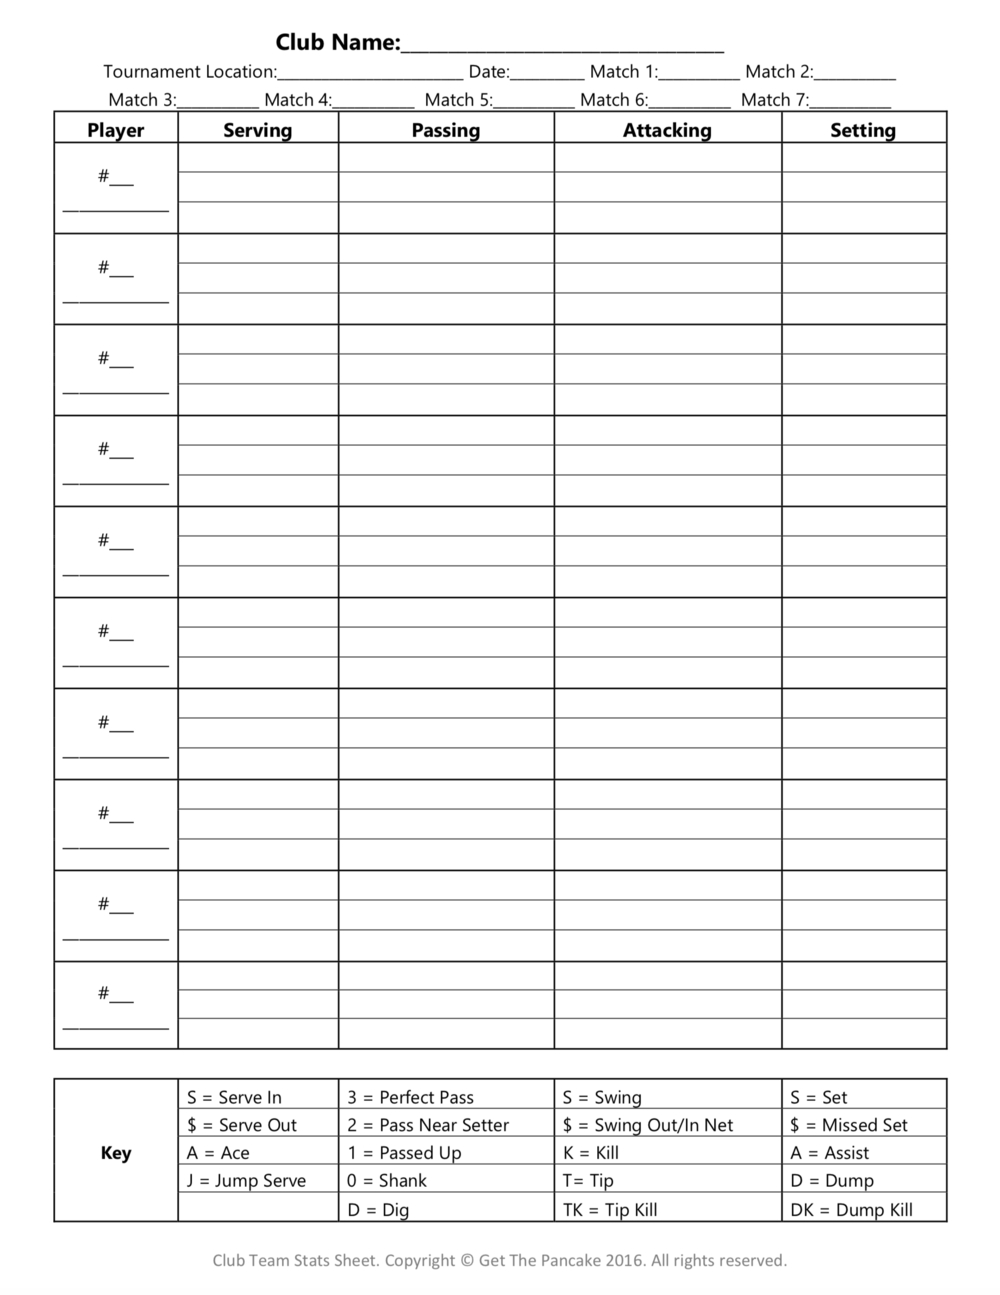 Free Volleyball Stats Sheets — Get The Pancake | A Website For - Printable Volleyball Stat Sheets Free